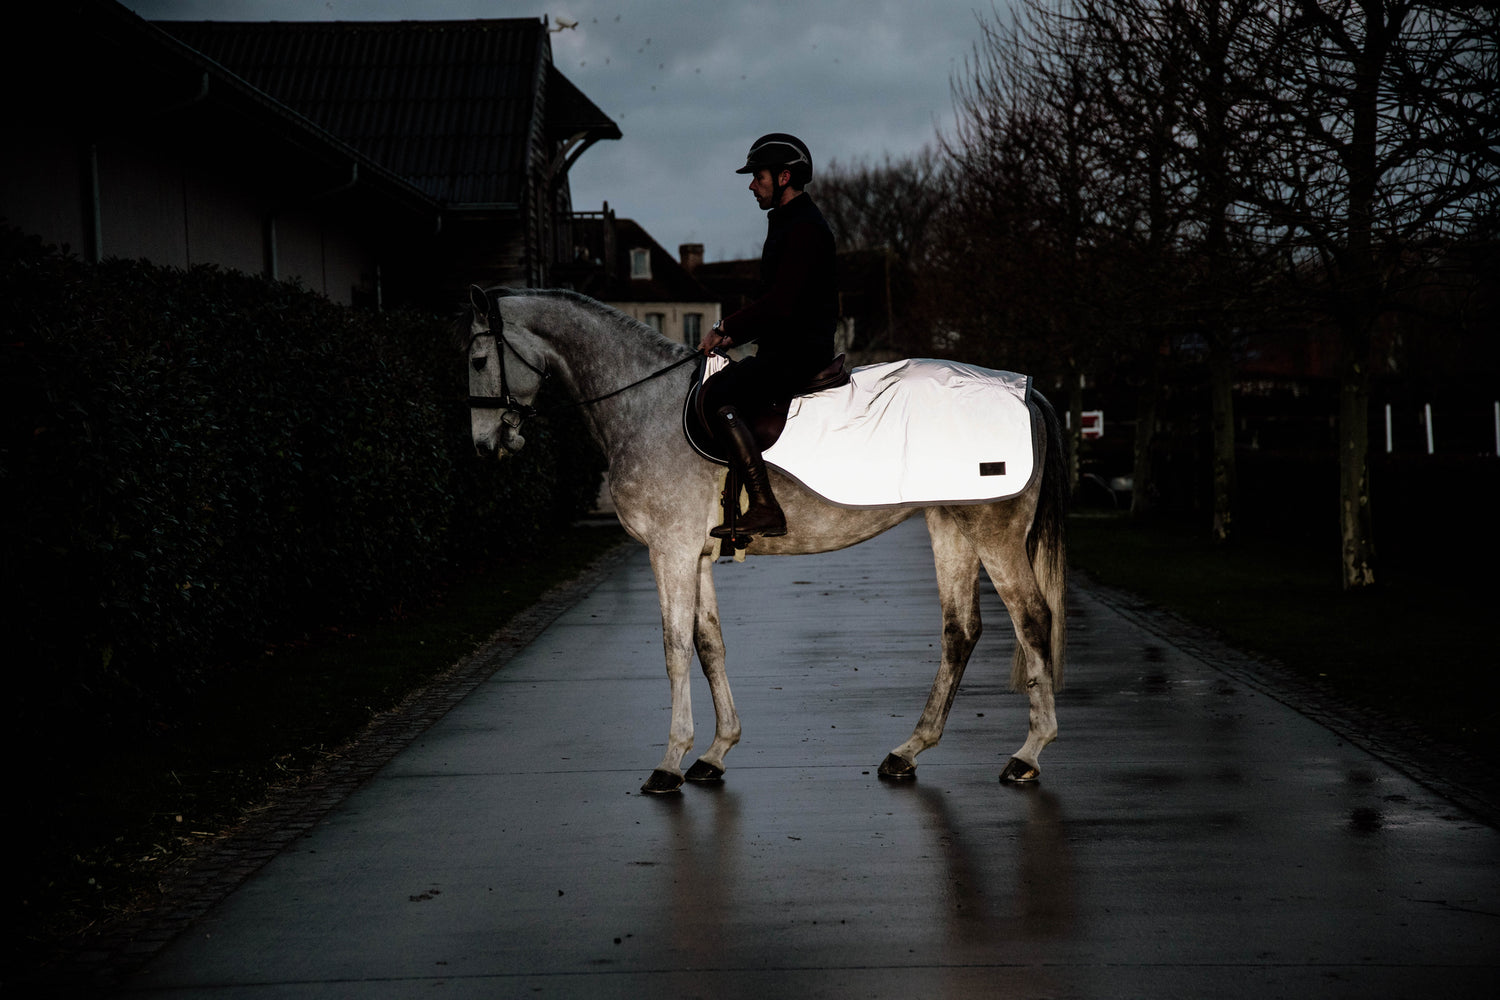 Kentucky Reflective Riding Rug     Protect your horse in poorly lit circumstances with our reflective riding rug, even in heavy rainfall. 